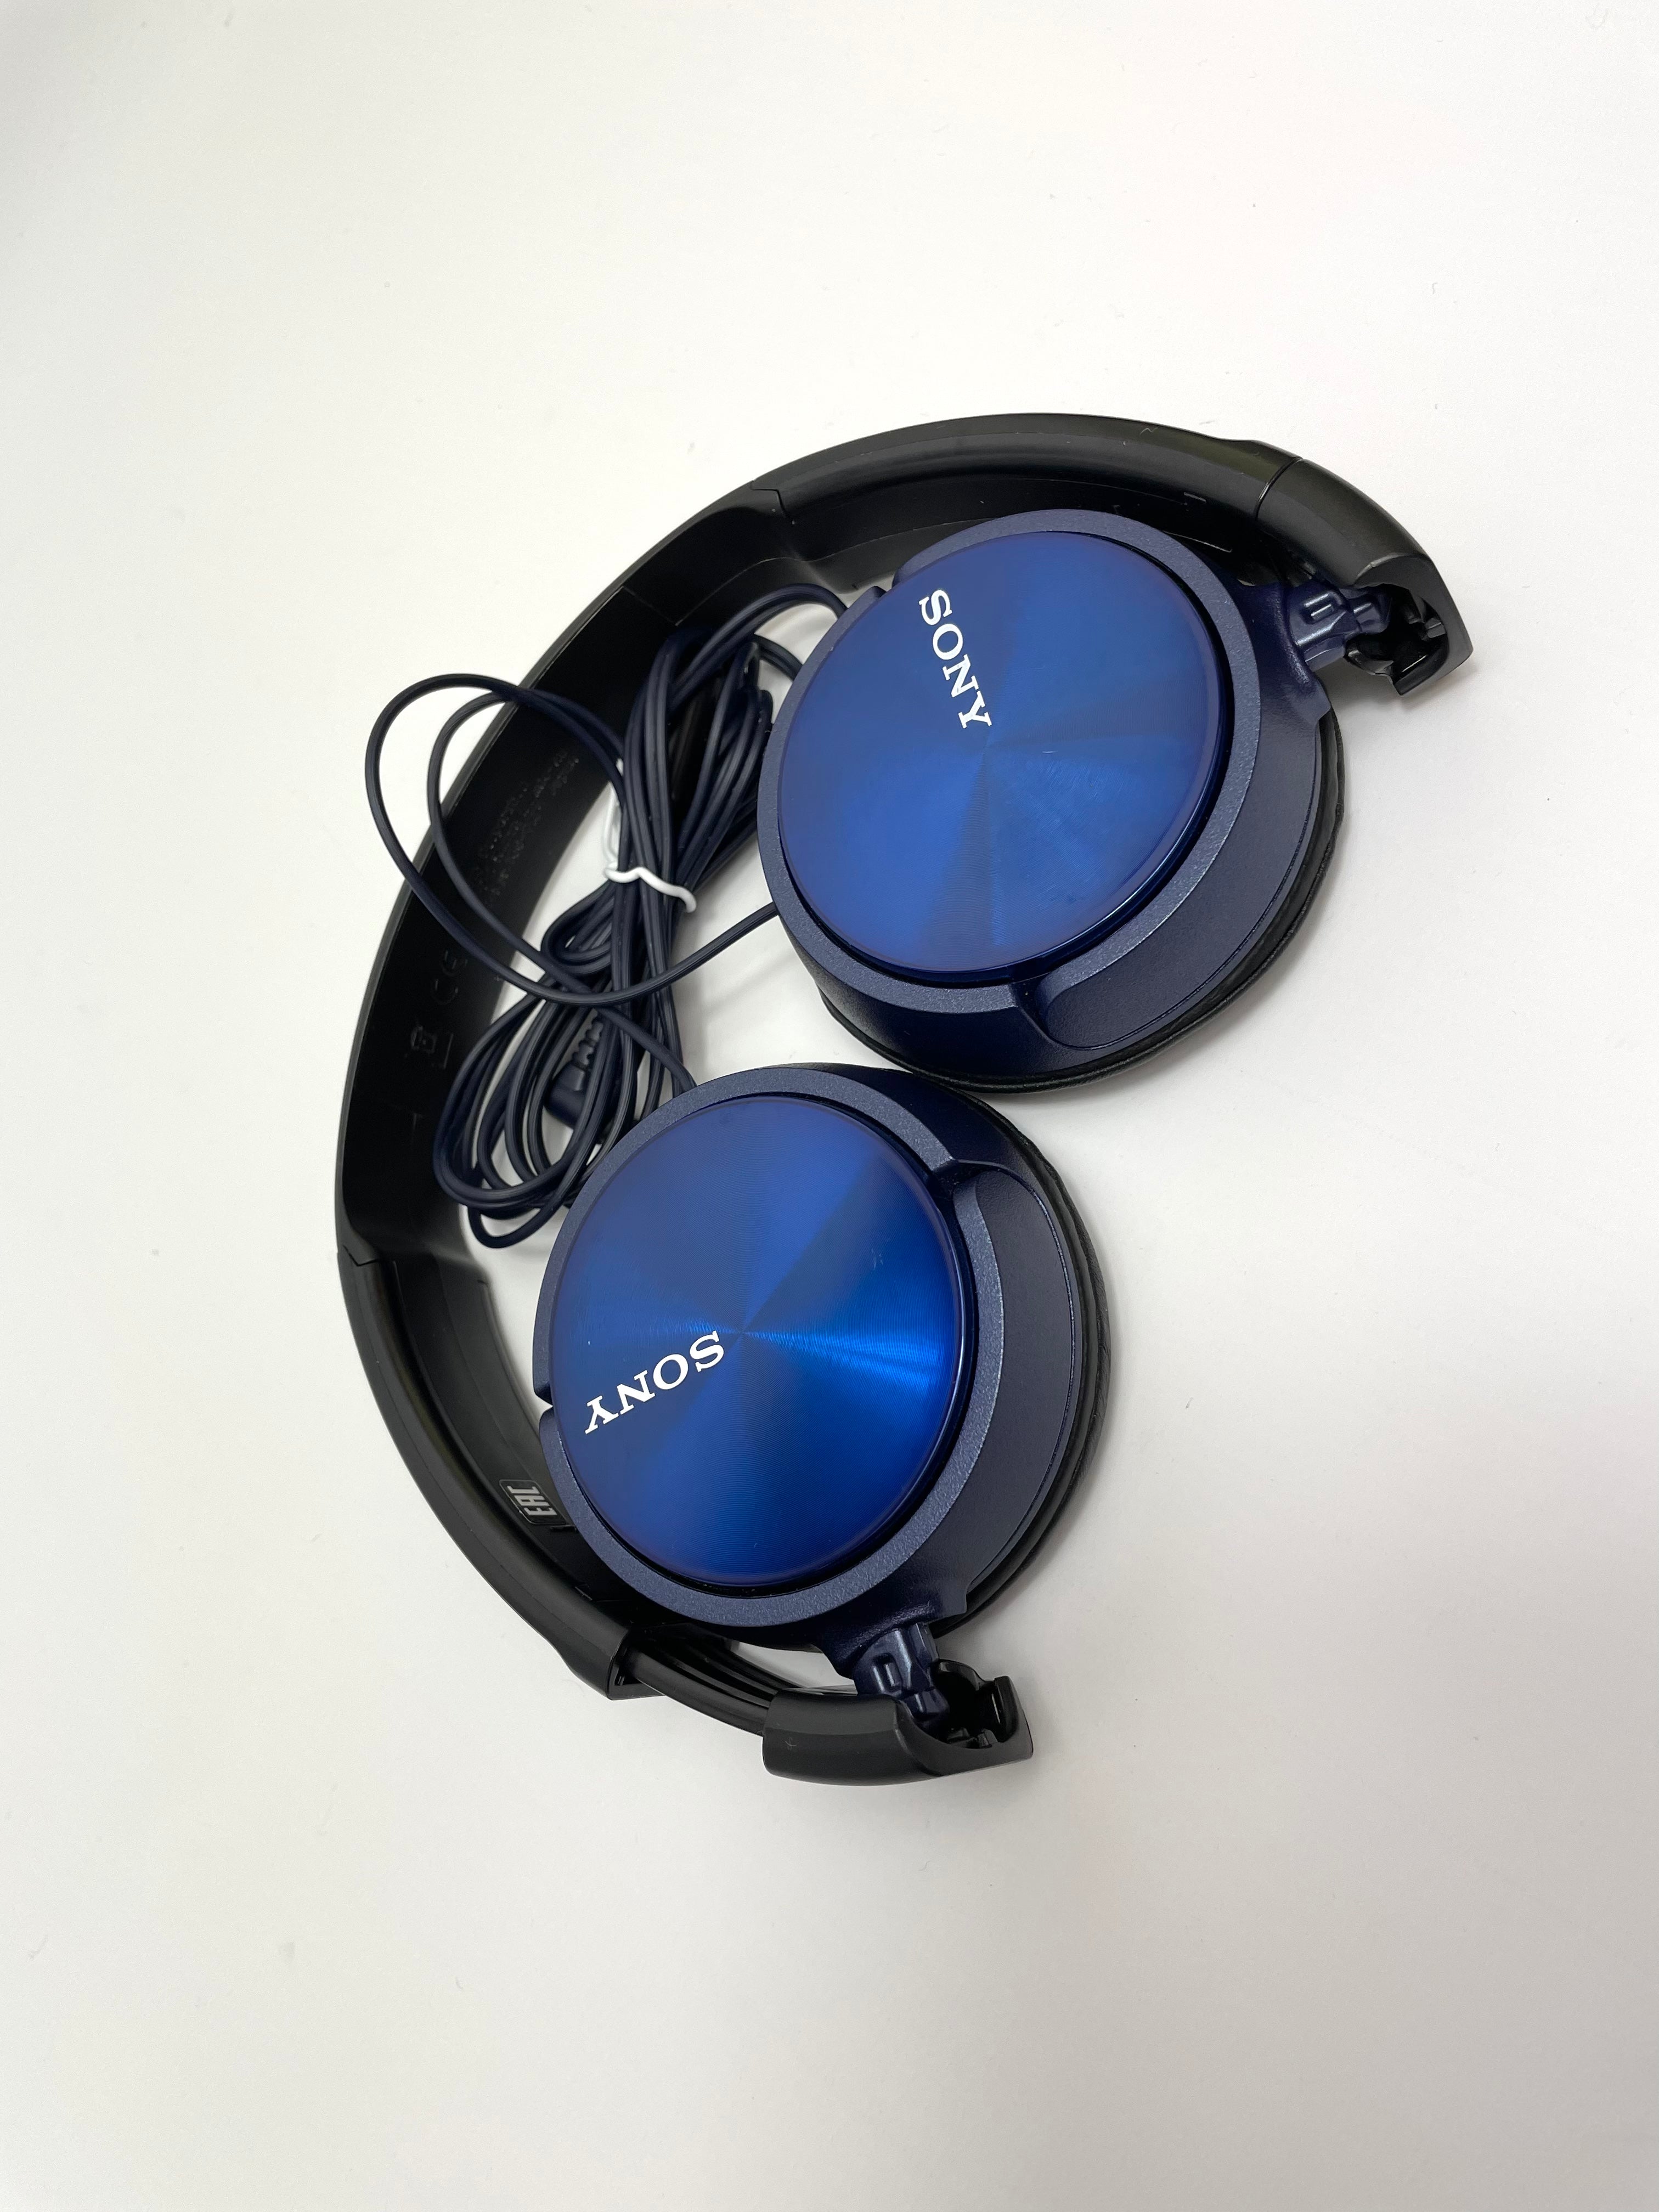 On-Ear Designer in MDR-ZX310 Headphones | Blu CLEARO Microphone – with Wired Sony Foldable Outlet